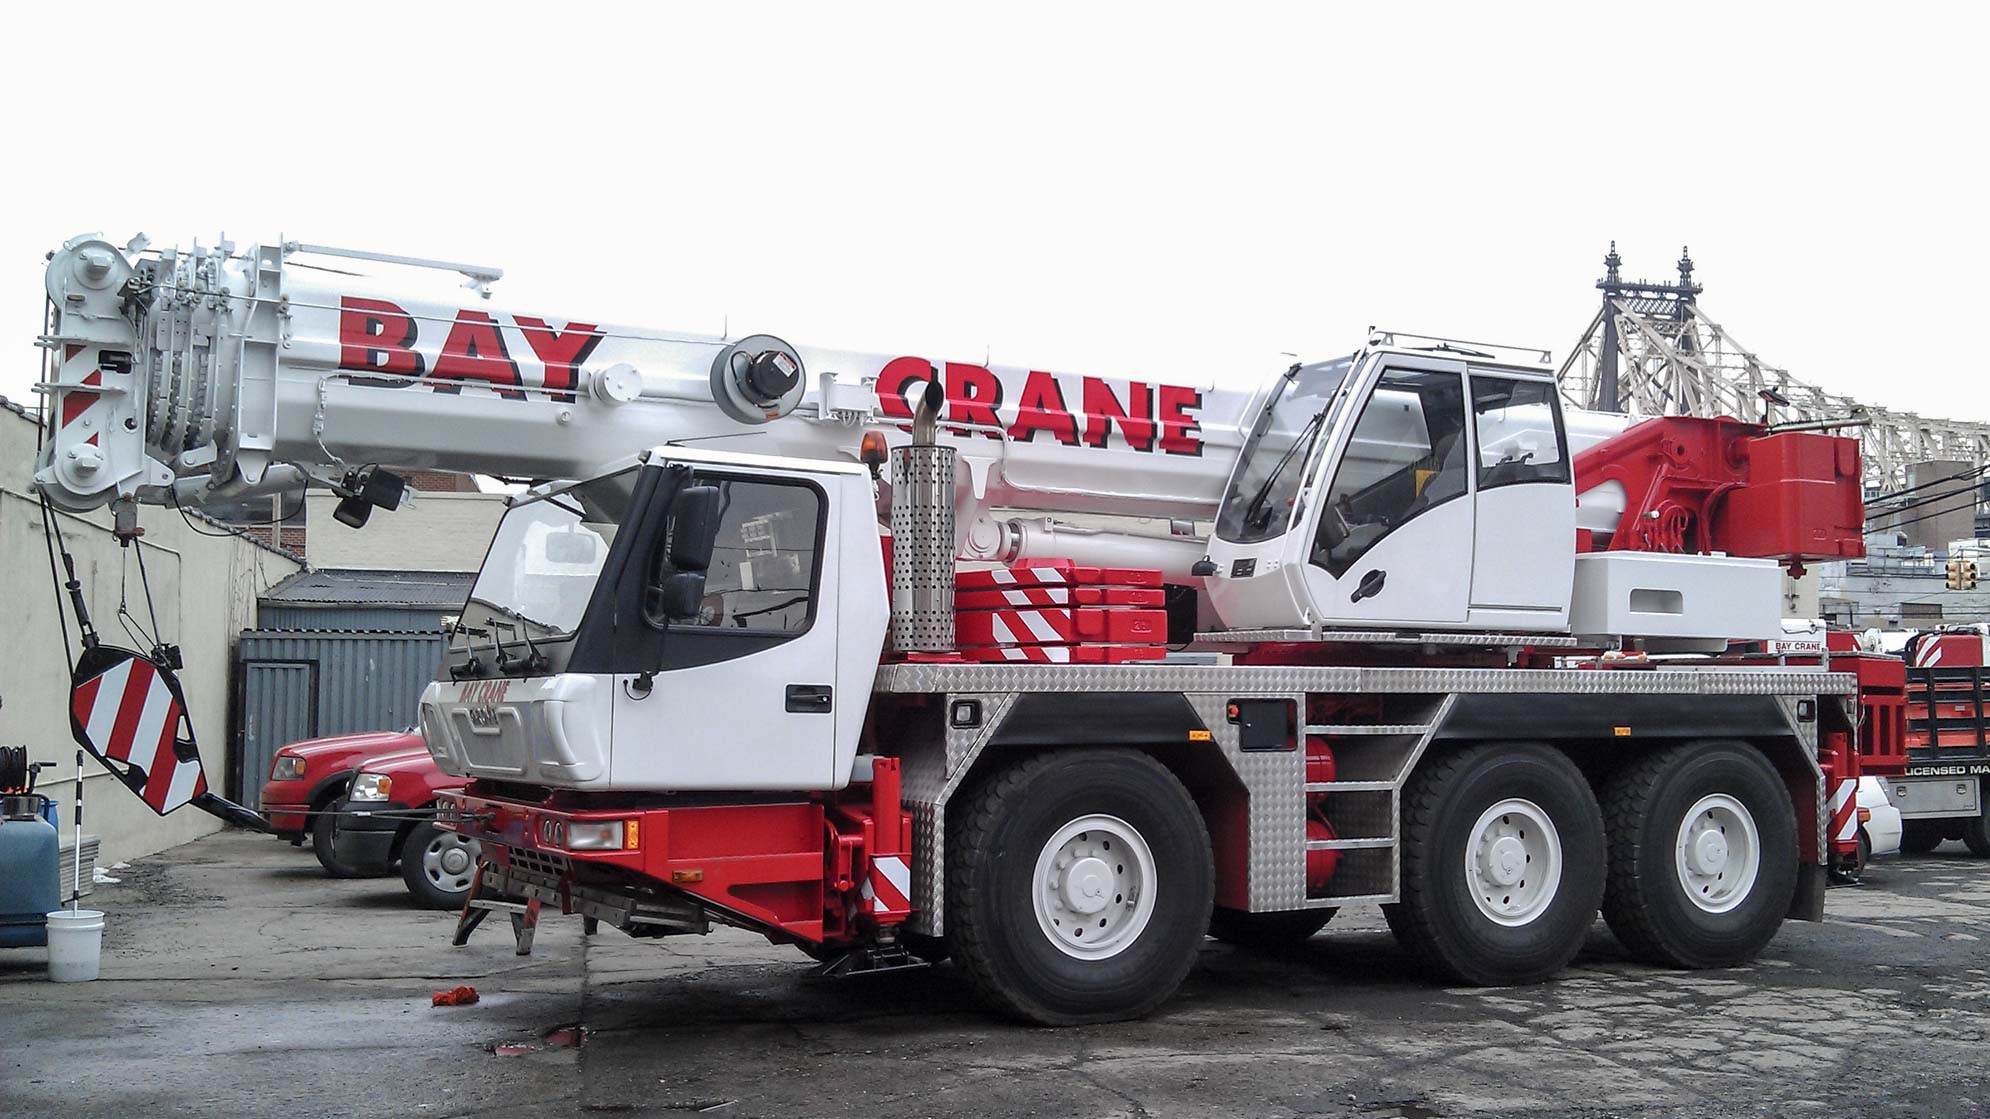 GMK 3050 crane with a hydraulic expandable